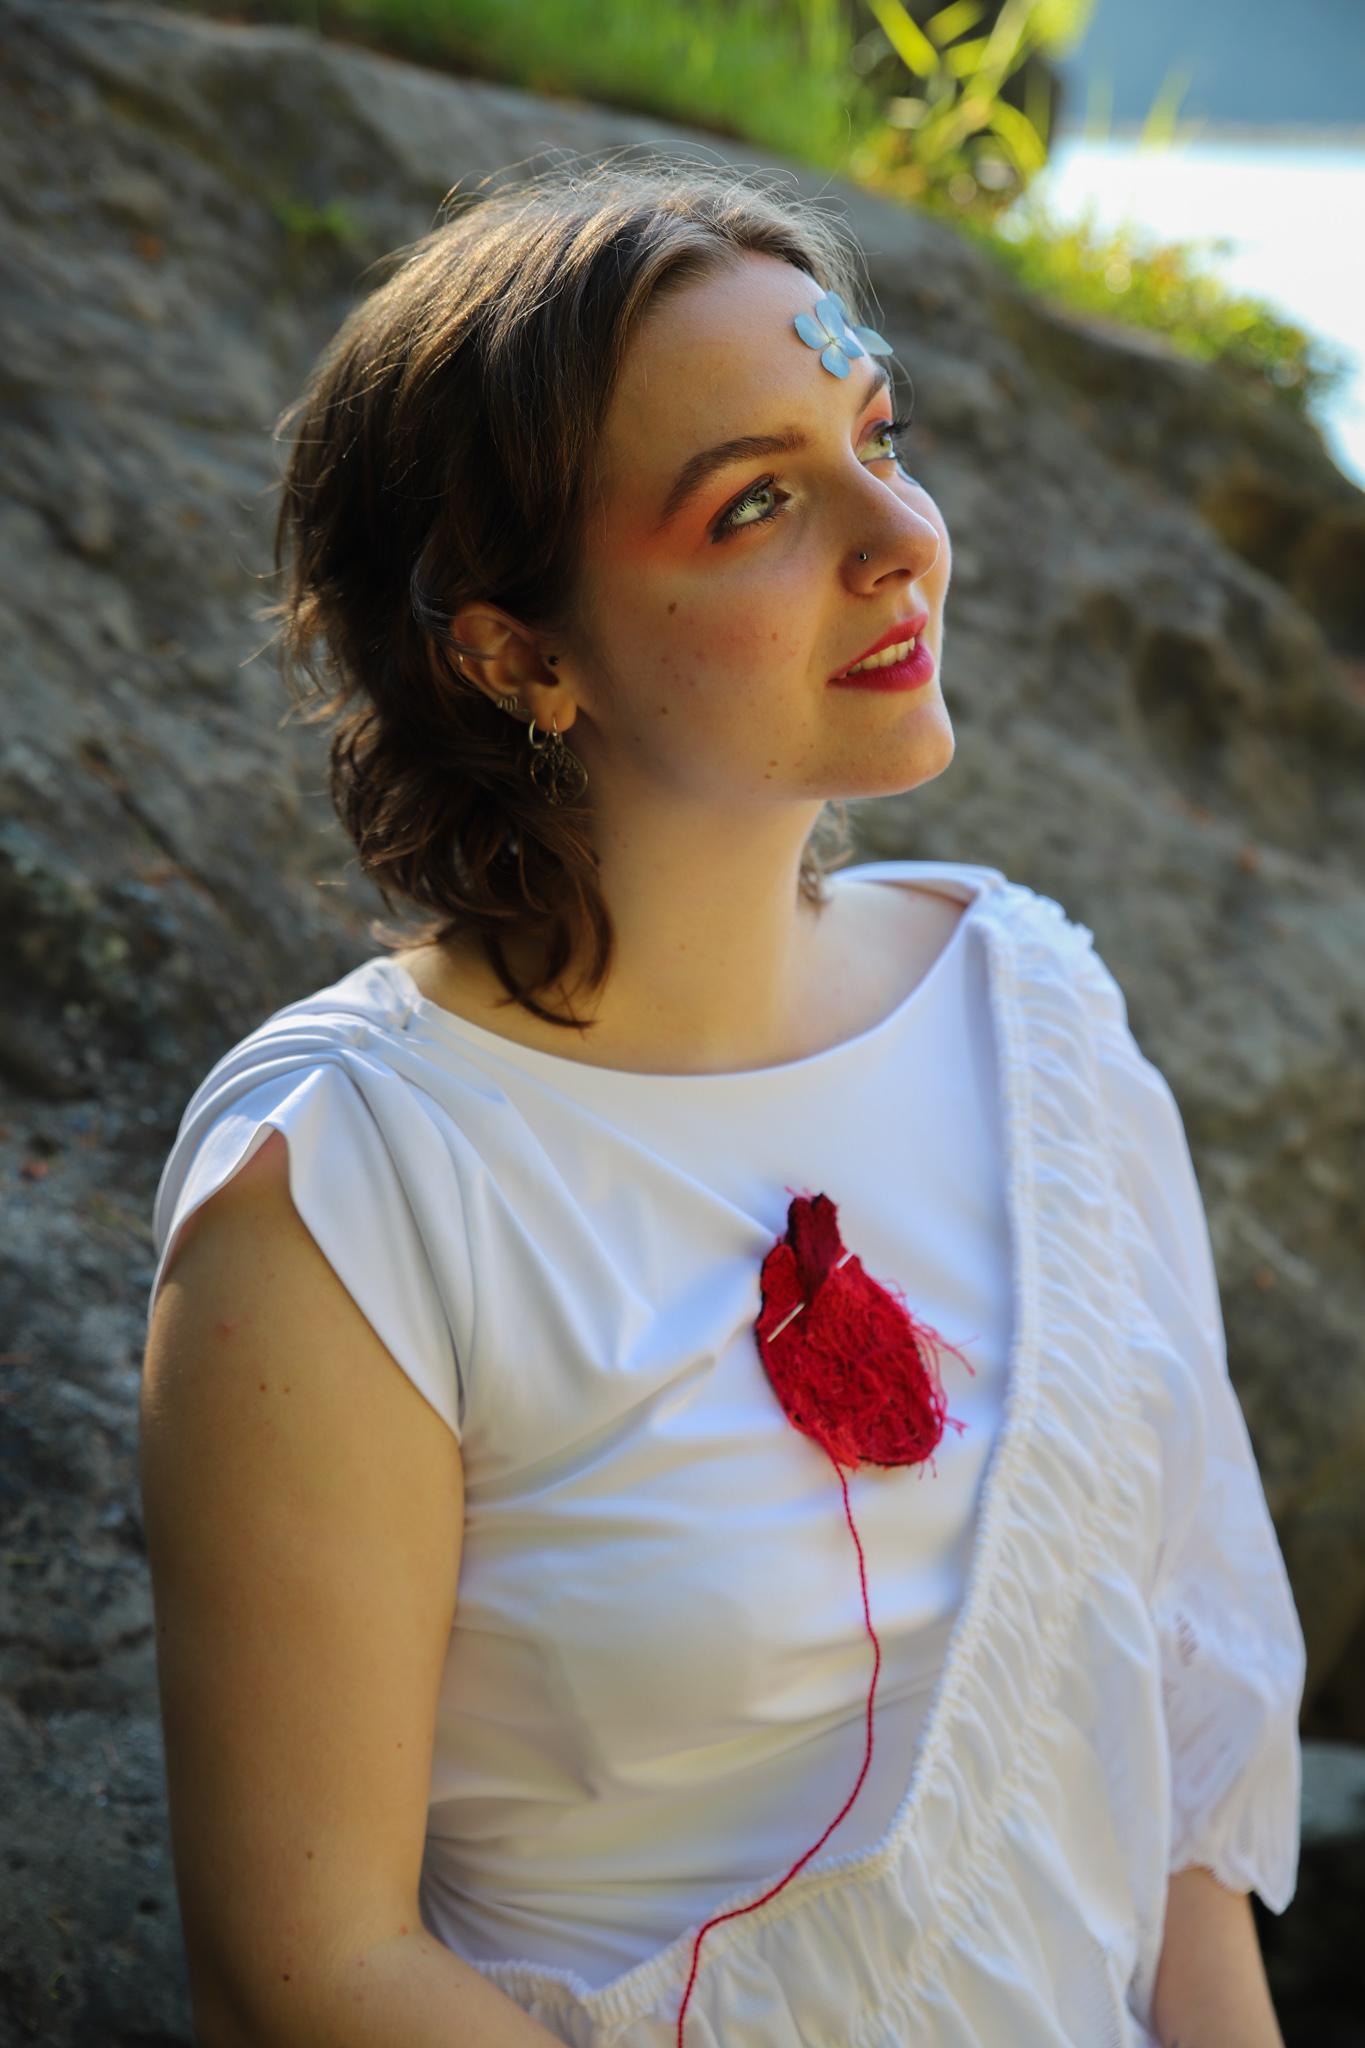 a young performer in a white sleeveless shirt in an outdoor setting. There is something like a anatomical yarn heart attached to the shirt and a butterfly on the person's forehead.